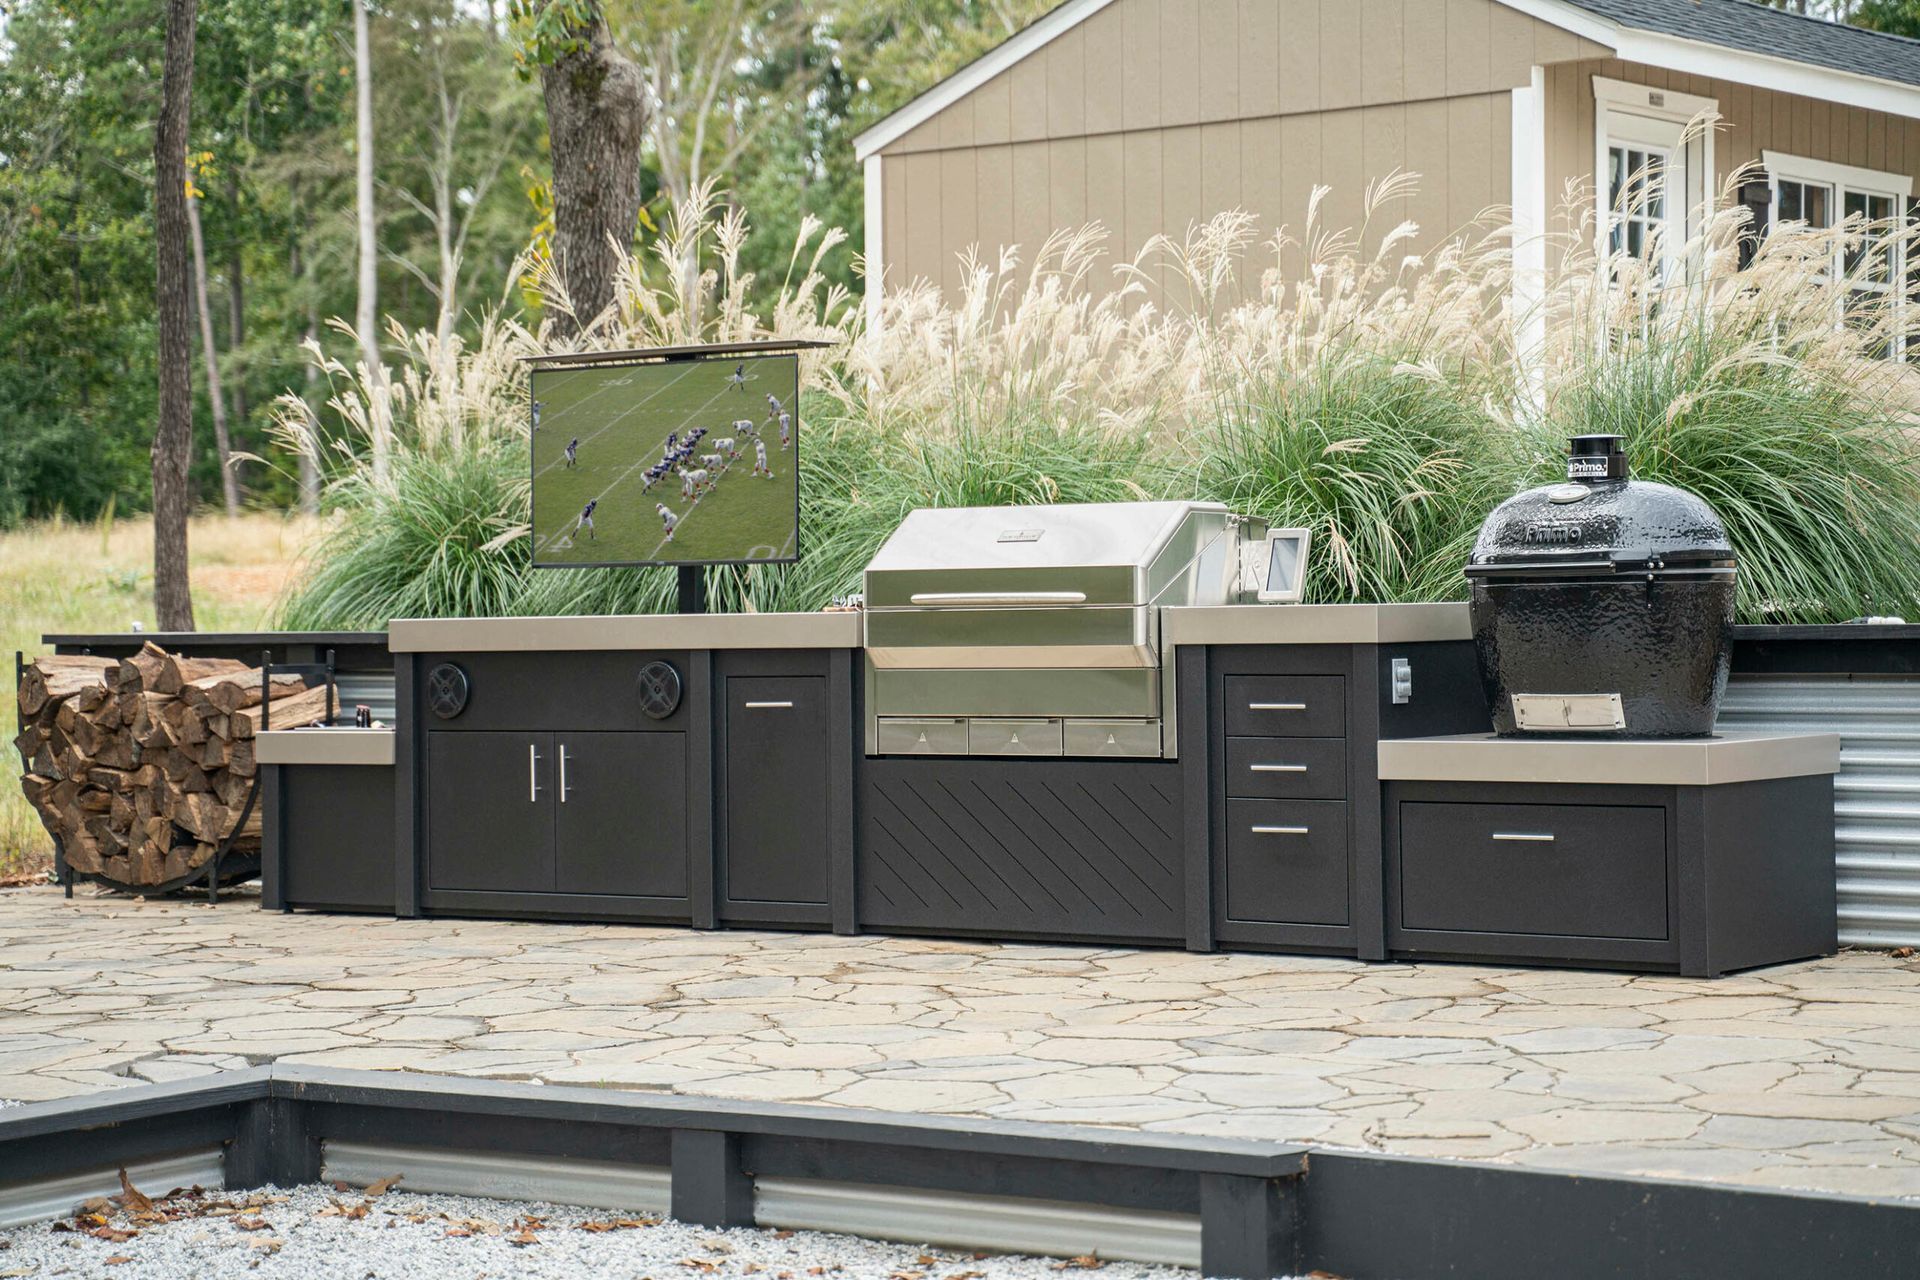 10 Best Reasons to Install an Outdoor Grill